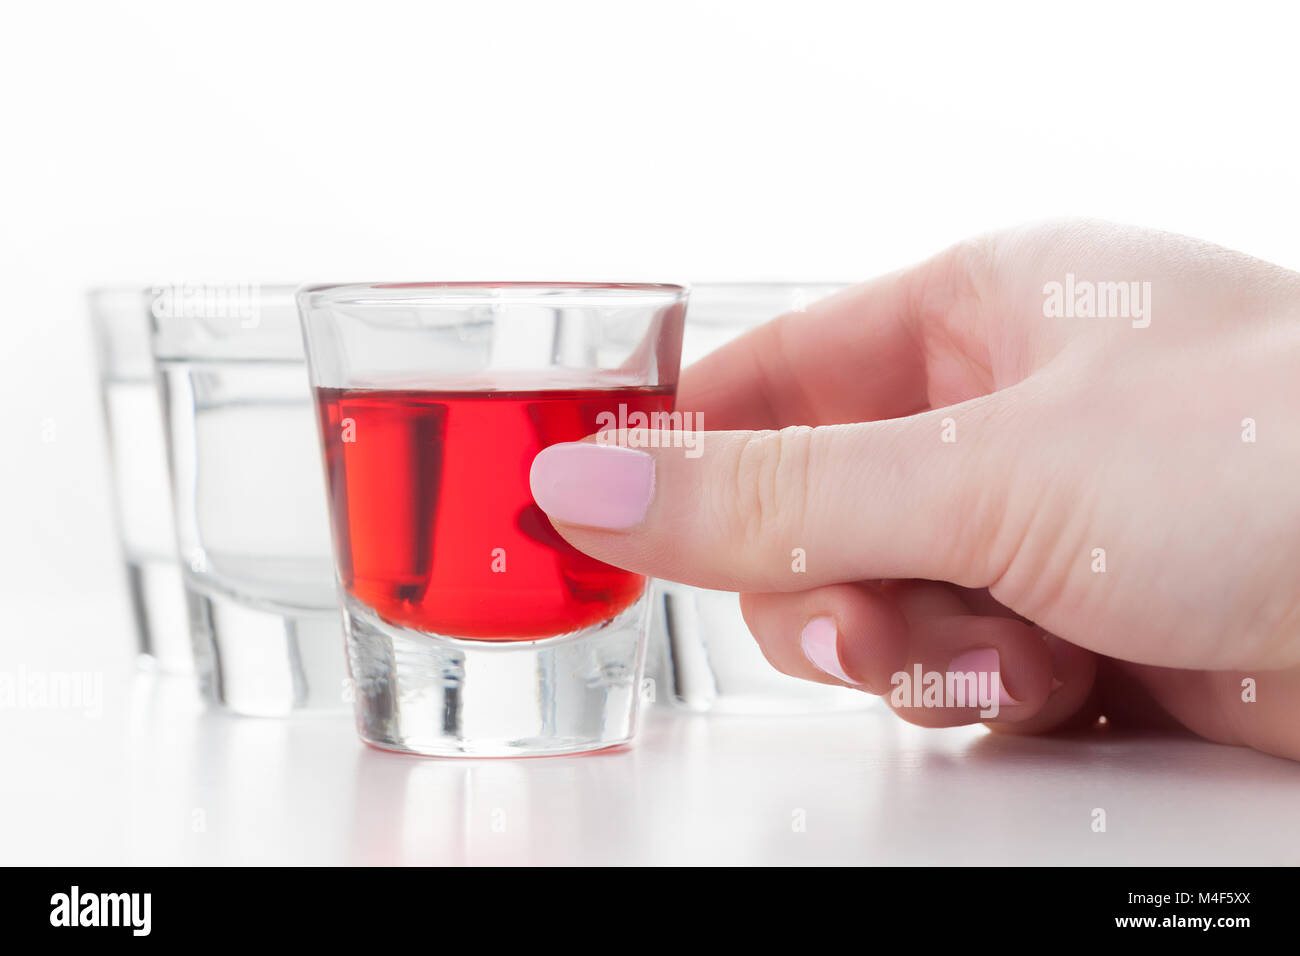 Woman#39;s hand reaching for a glass of alcohol drink. Stock Photo